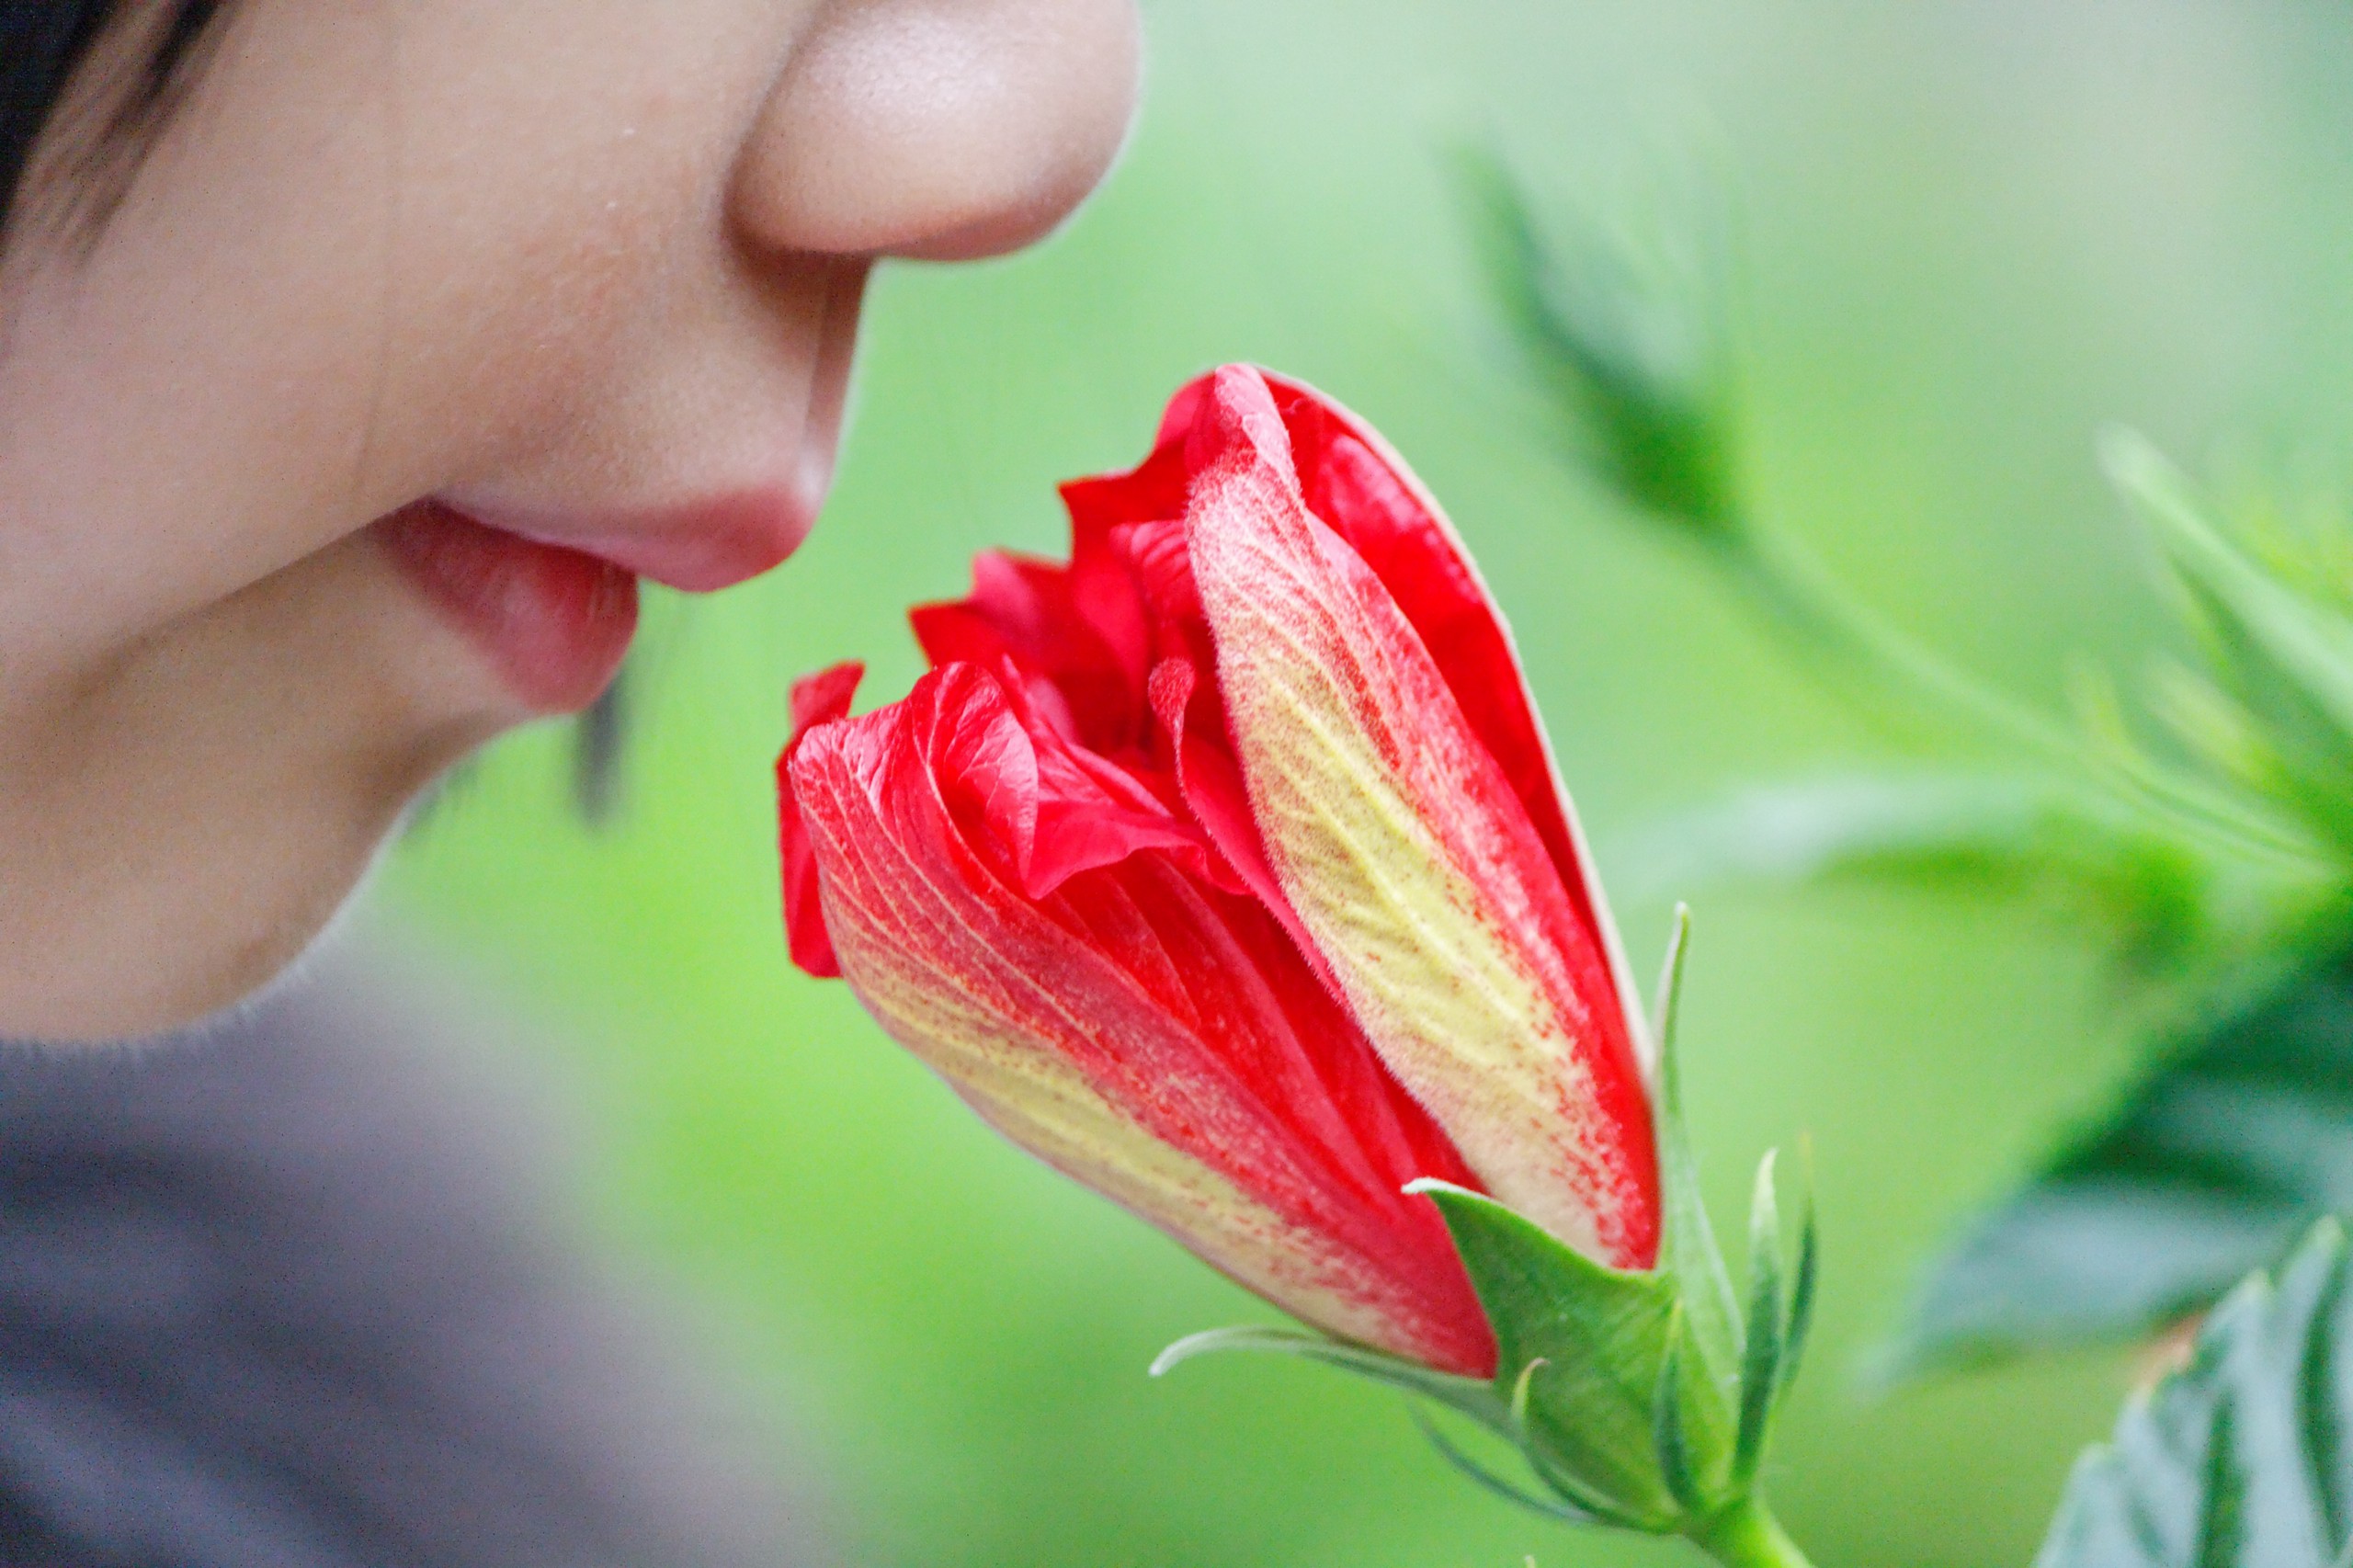 A closeup of a person's nose smelling a red flower.